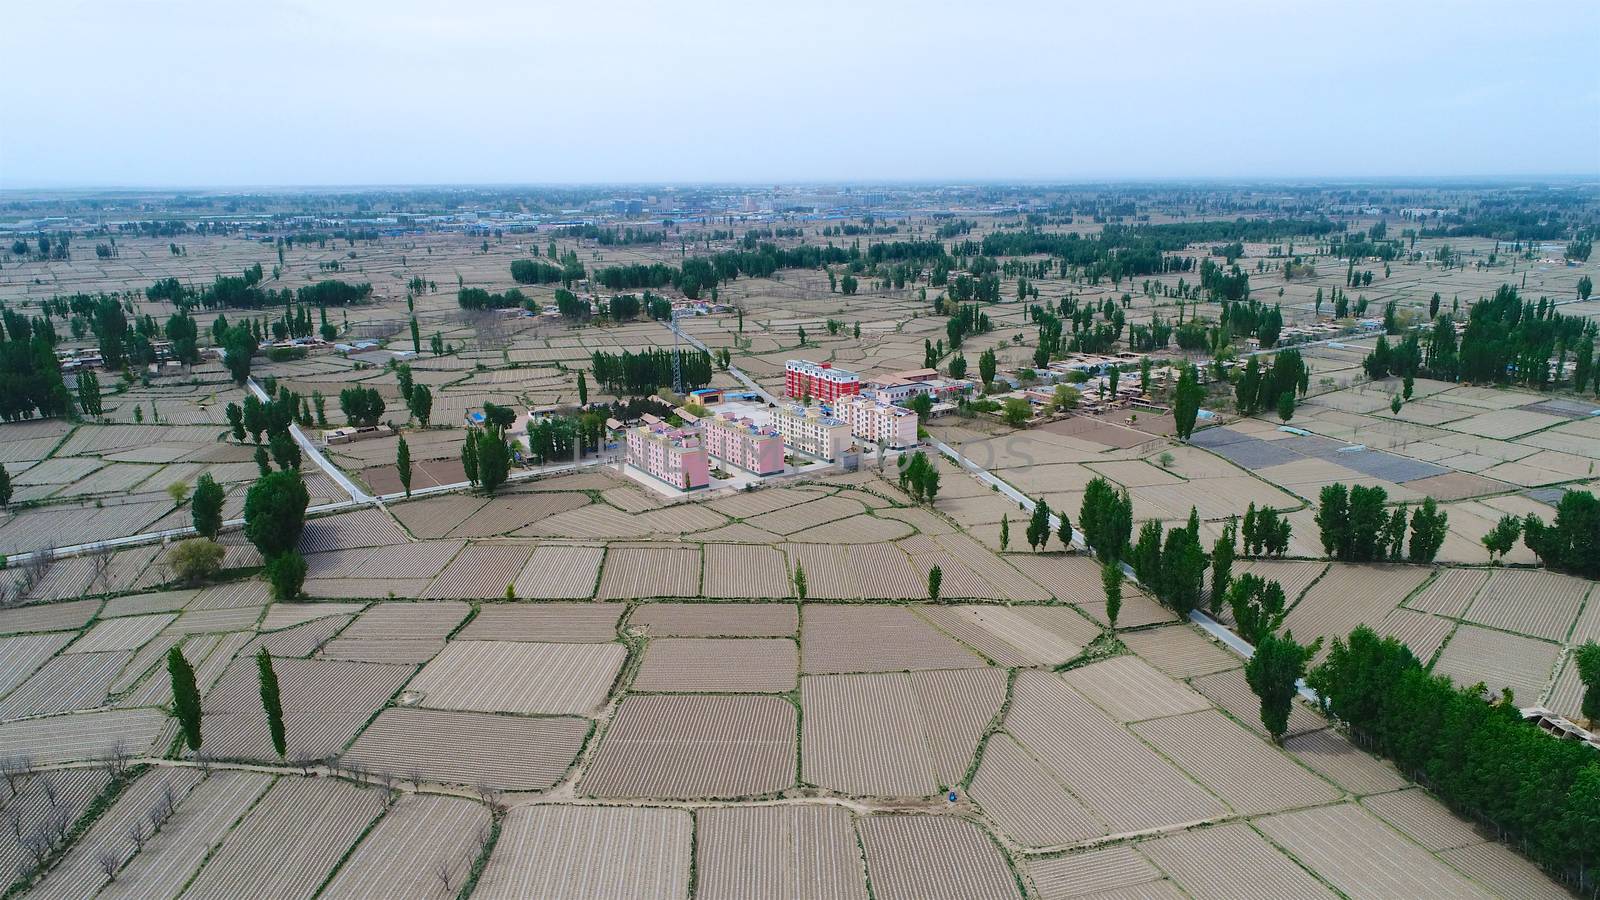 Aerial view of small poor village with school in the middle of dry farmland by Bonandbon